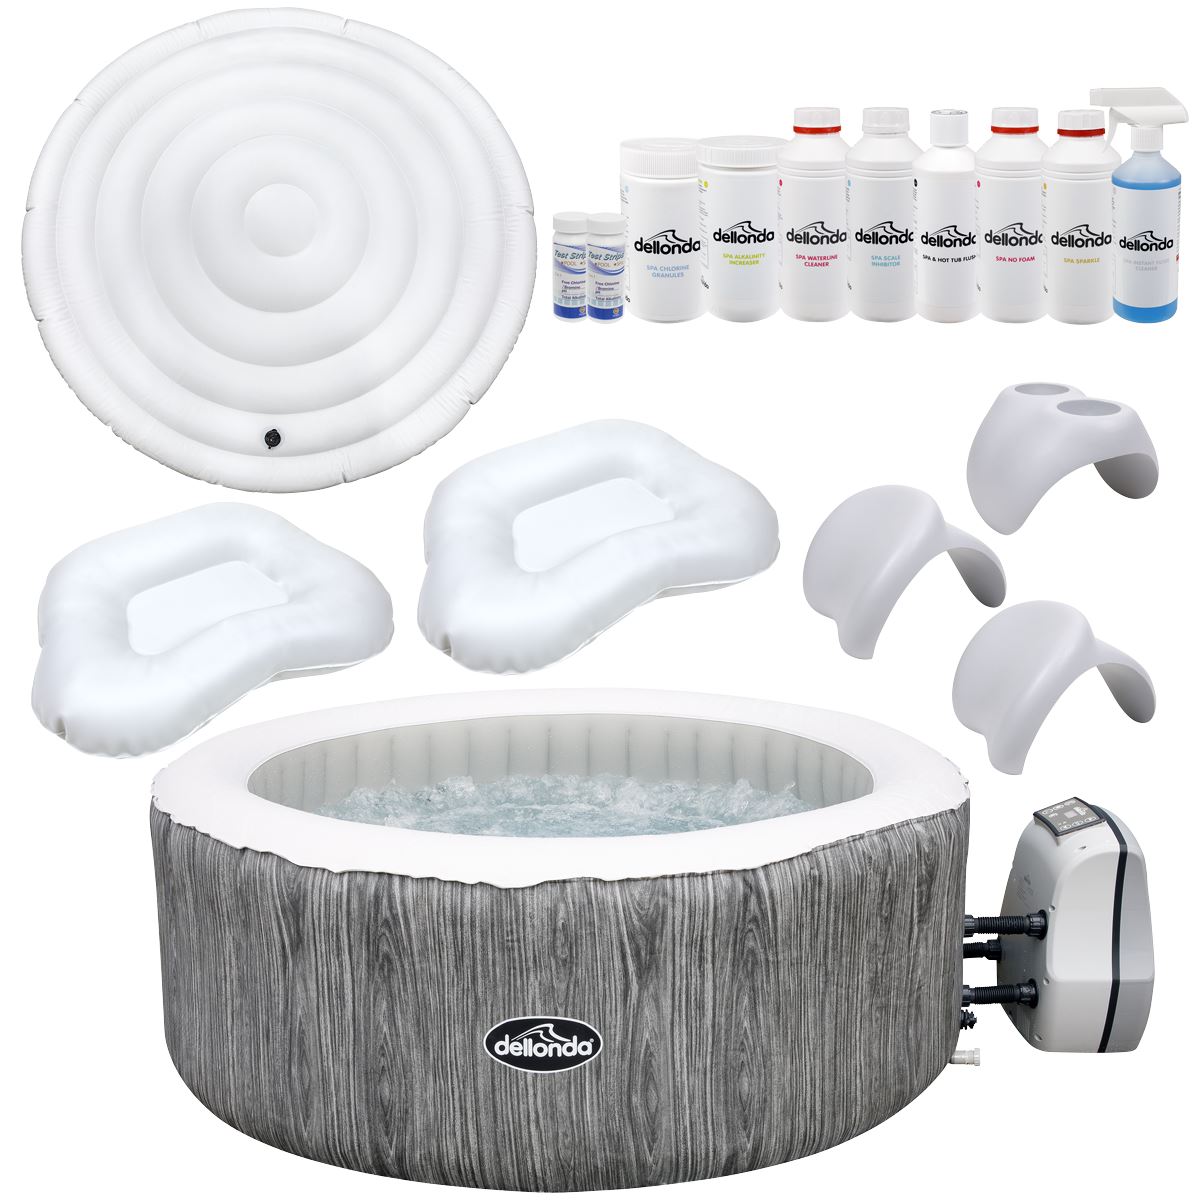 Dellonda 2-4 Person Inflatable Hot Tub Spa with Smart Pump and Master Accessory Kit - Wood Effect